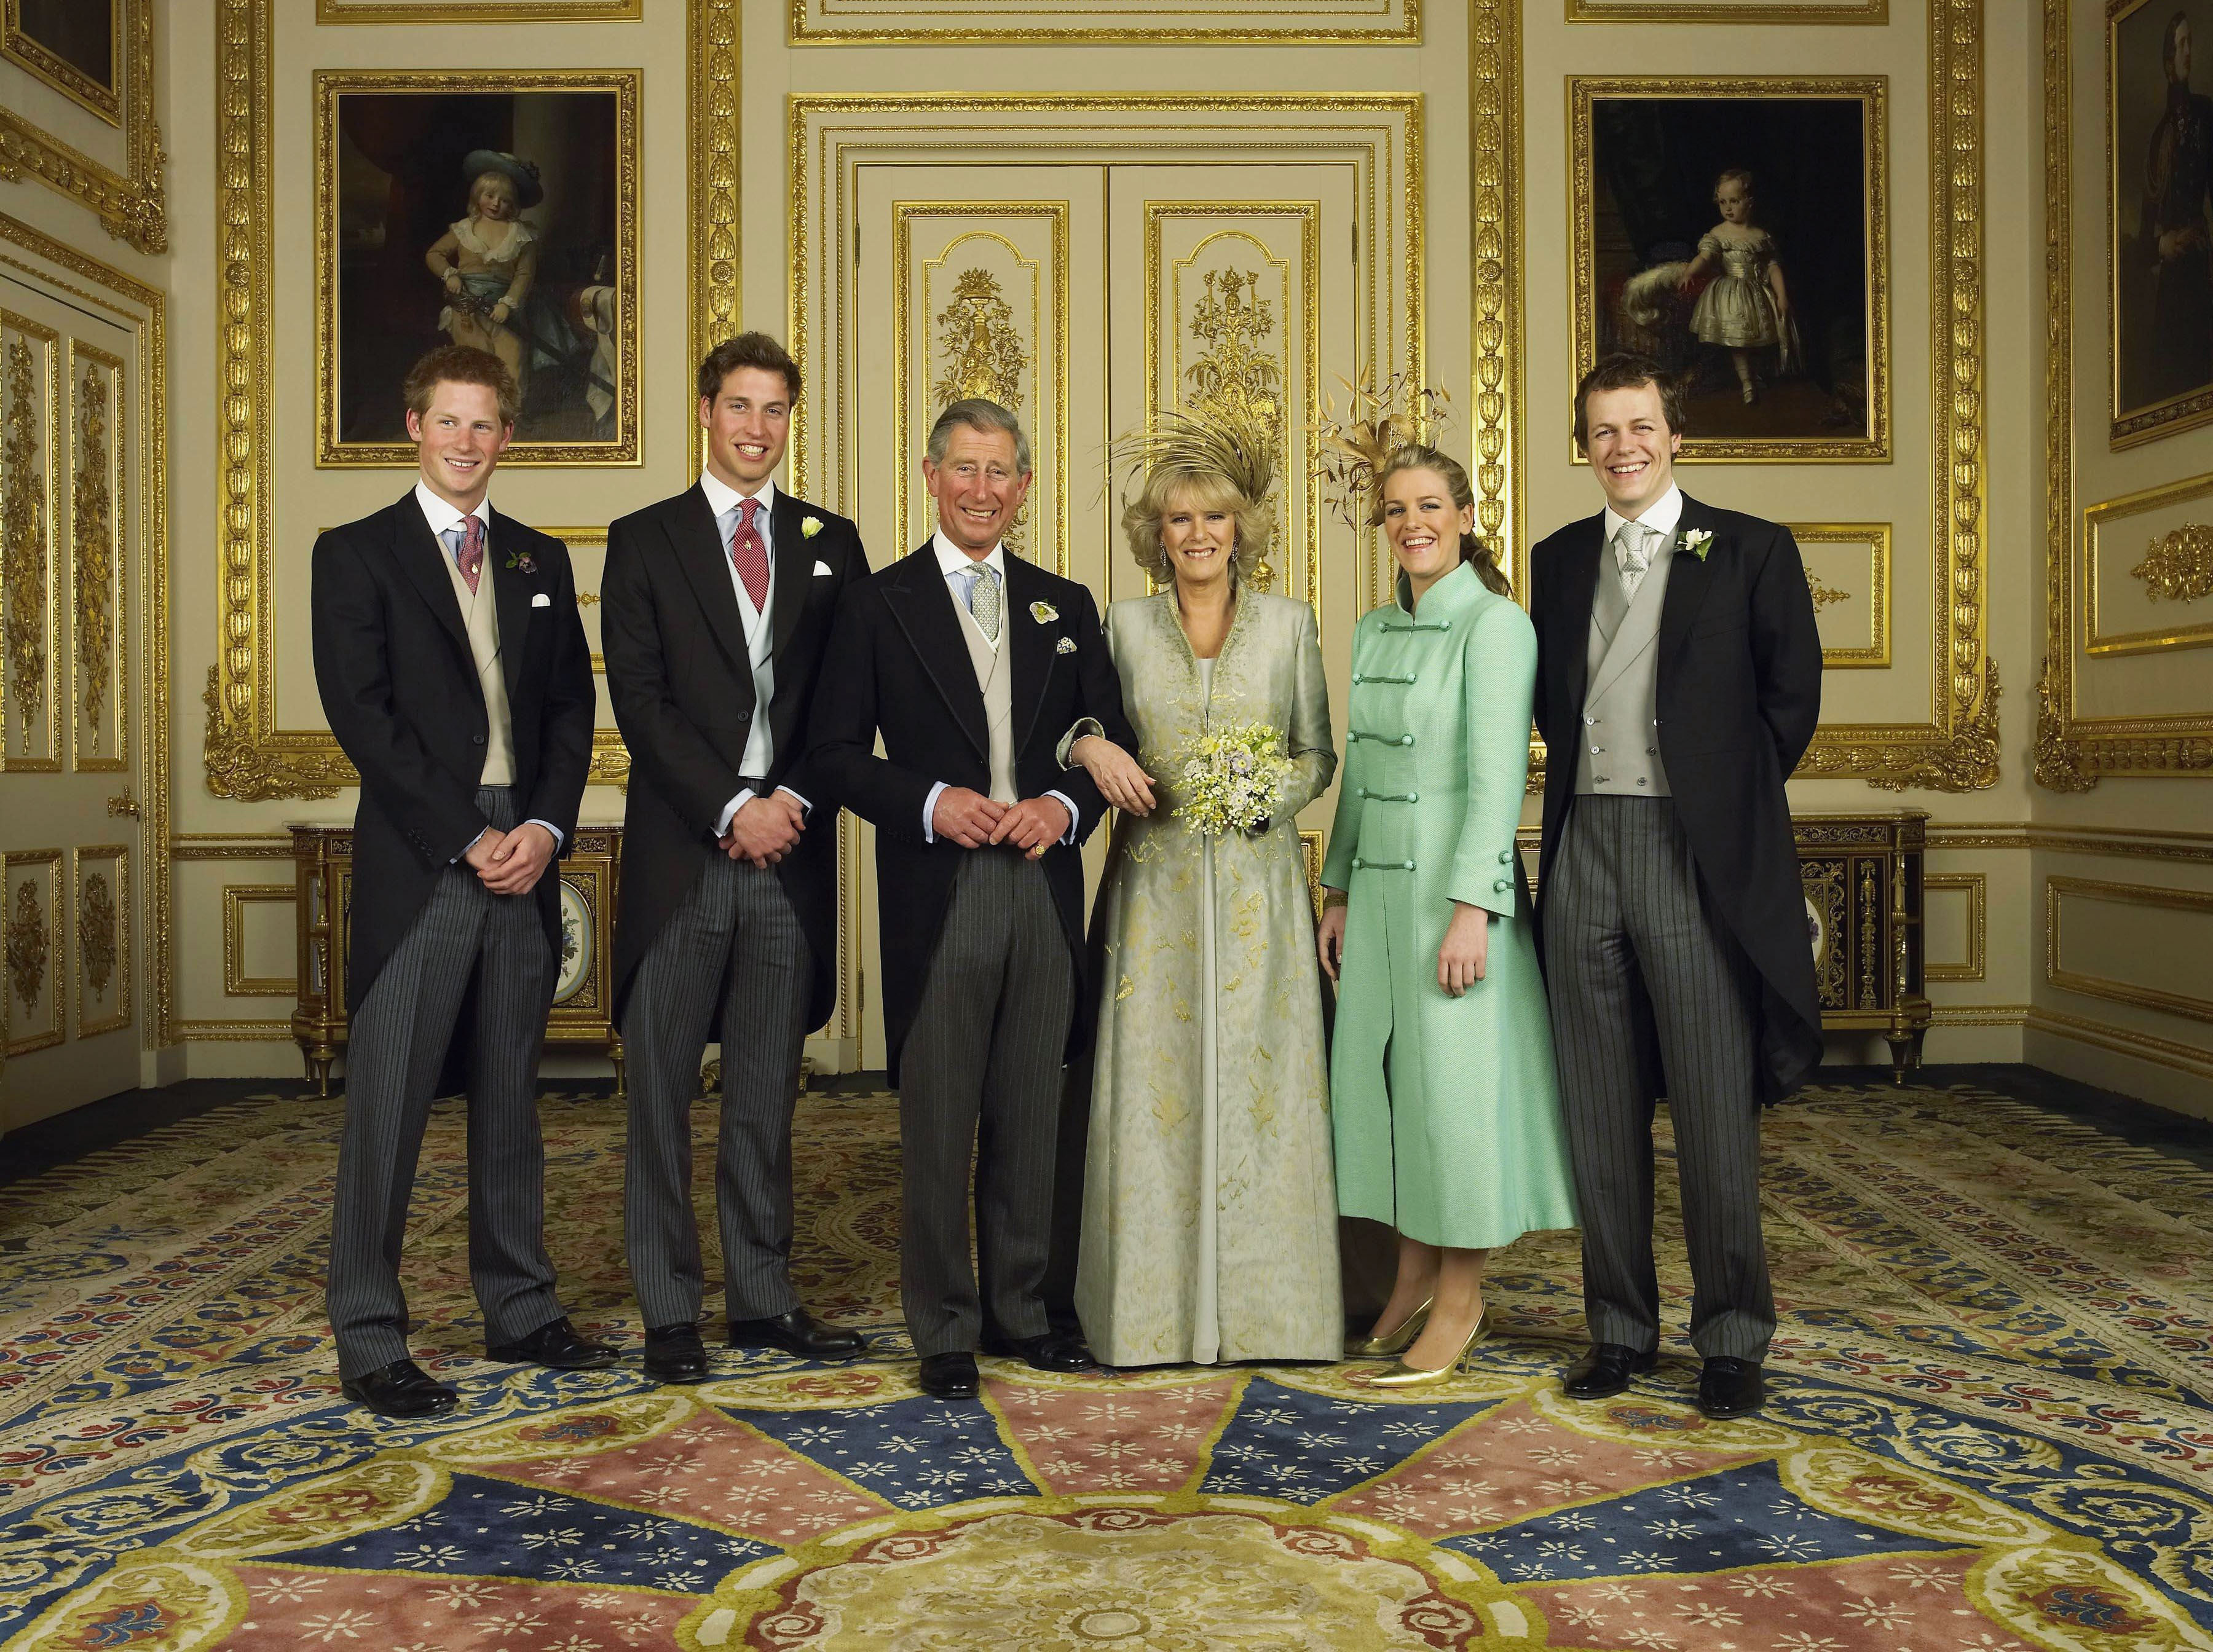 Prince Charles and Camilla Parker Bowles' wedding portrait with family